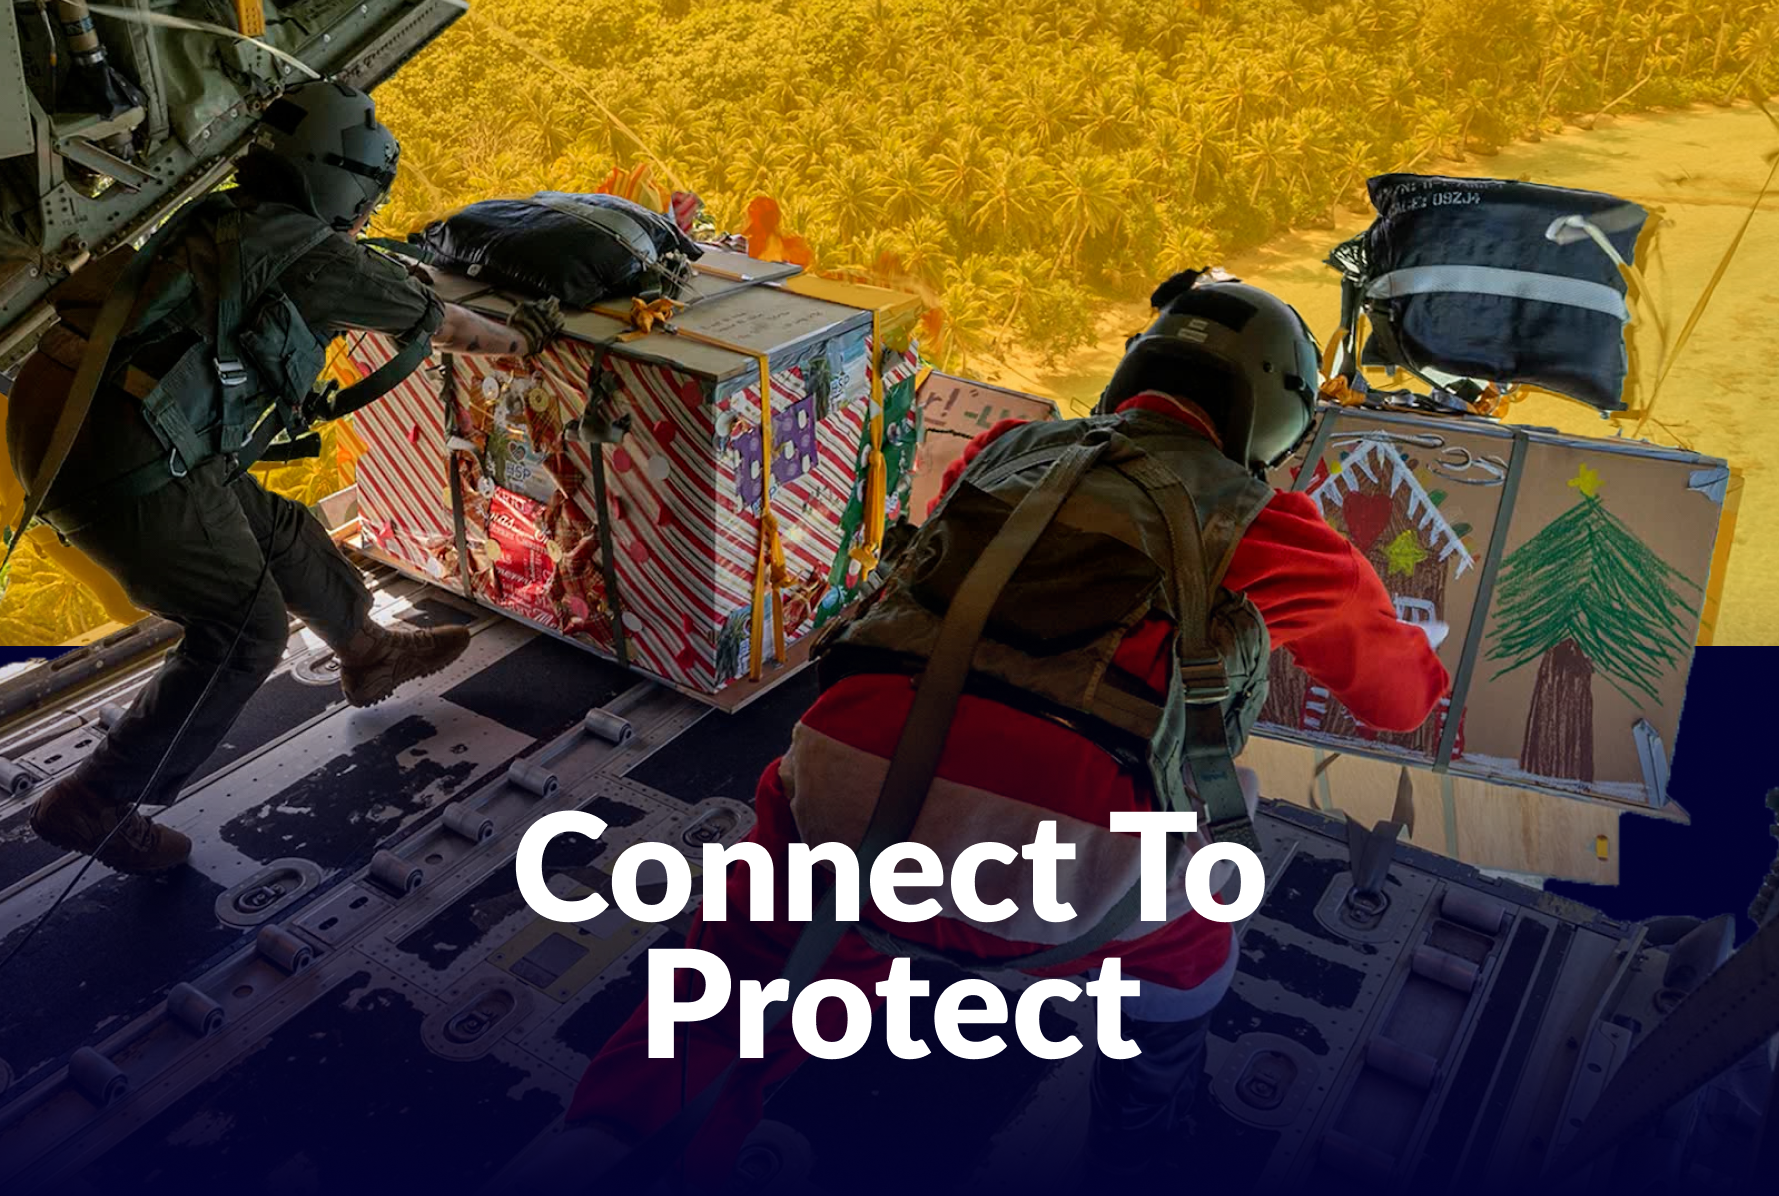 The holidays are all about connecting with friends, family, and our communities. It is important to stay connected now and through the year. Joining Your Fight - Connect to Protect.